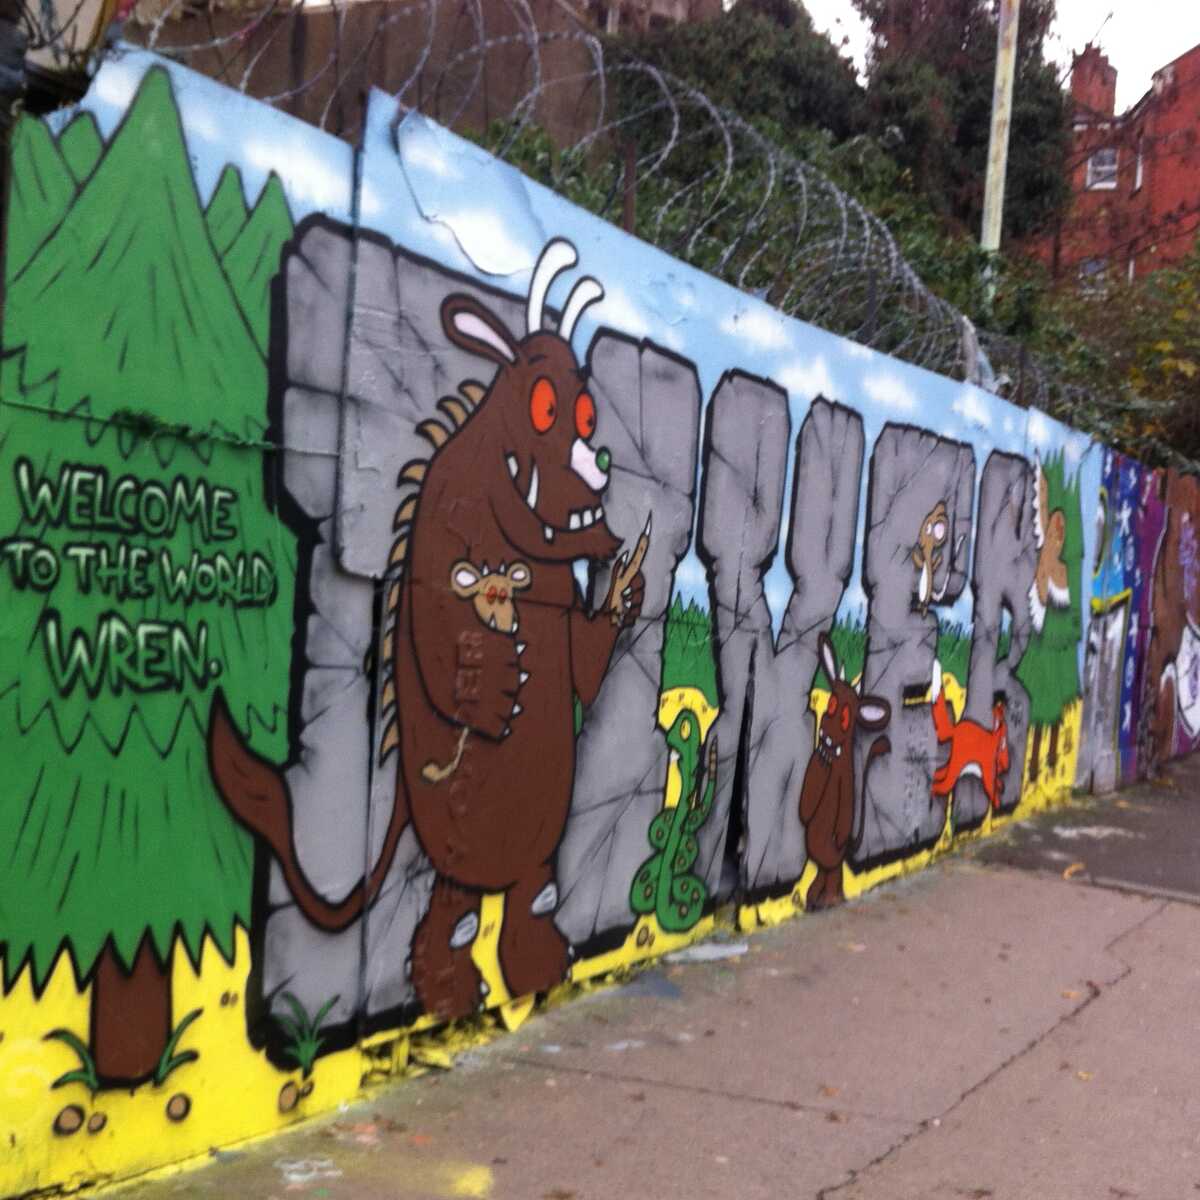 Graffiti of characters from the book, The Gruffalo